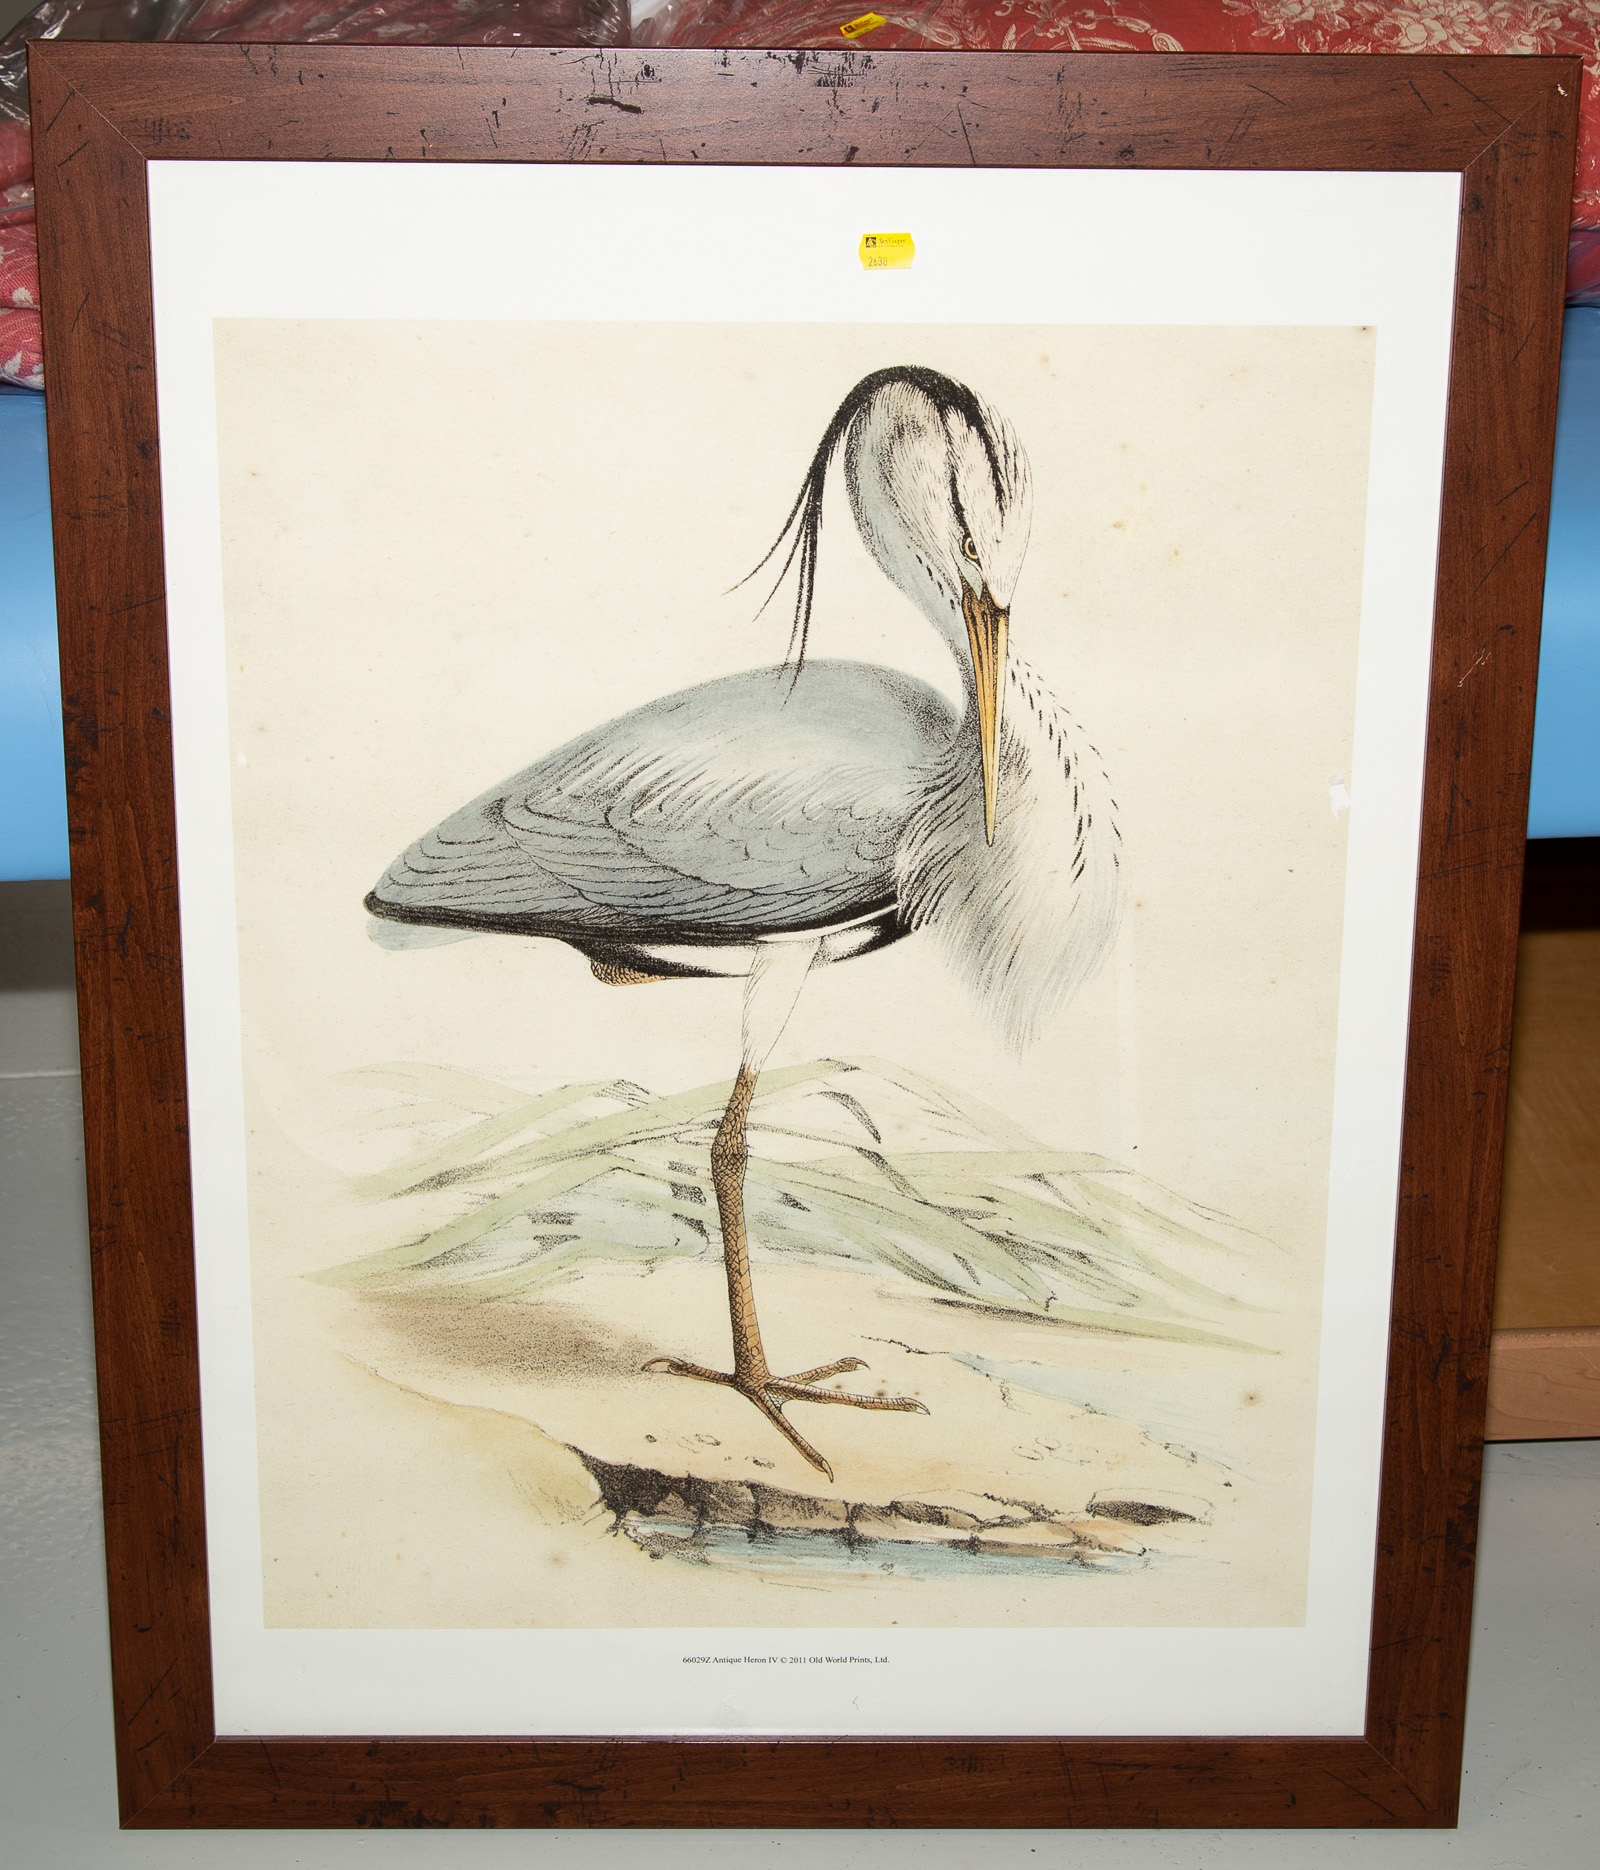 FRAMED REPRODUCTION PRINT OF A